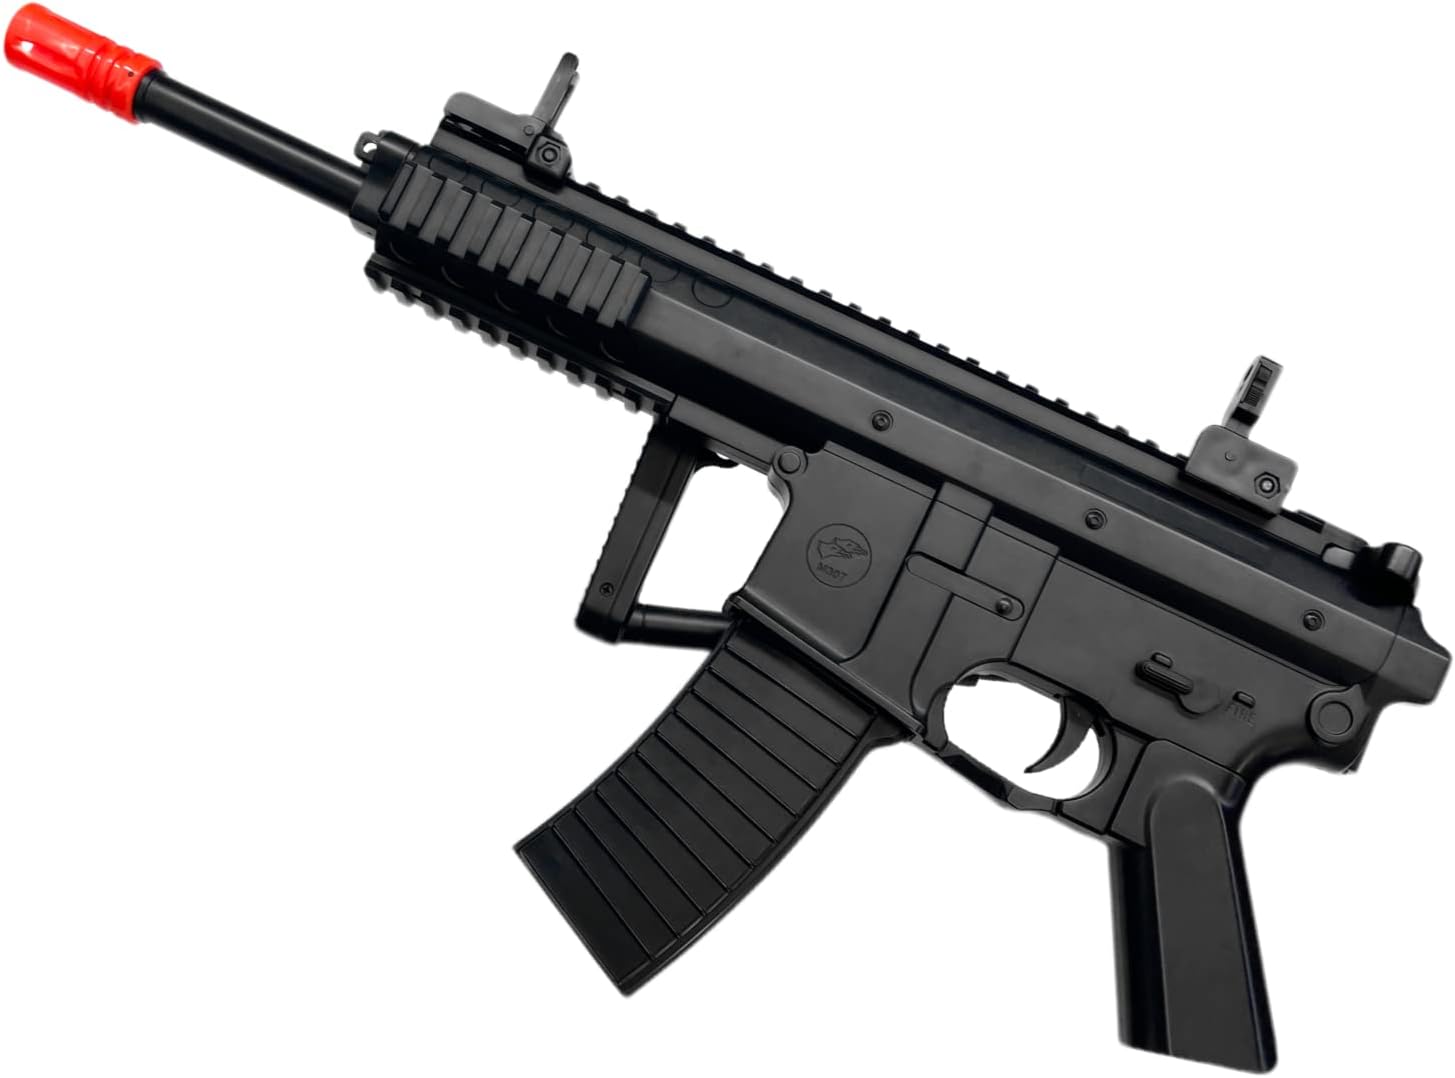 DOUBLE EAGLE M307F AIRSOFT SPRING RIFLE